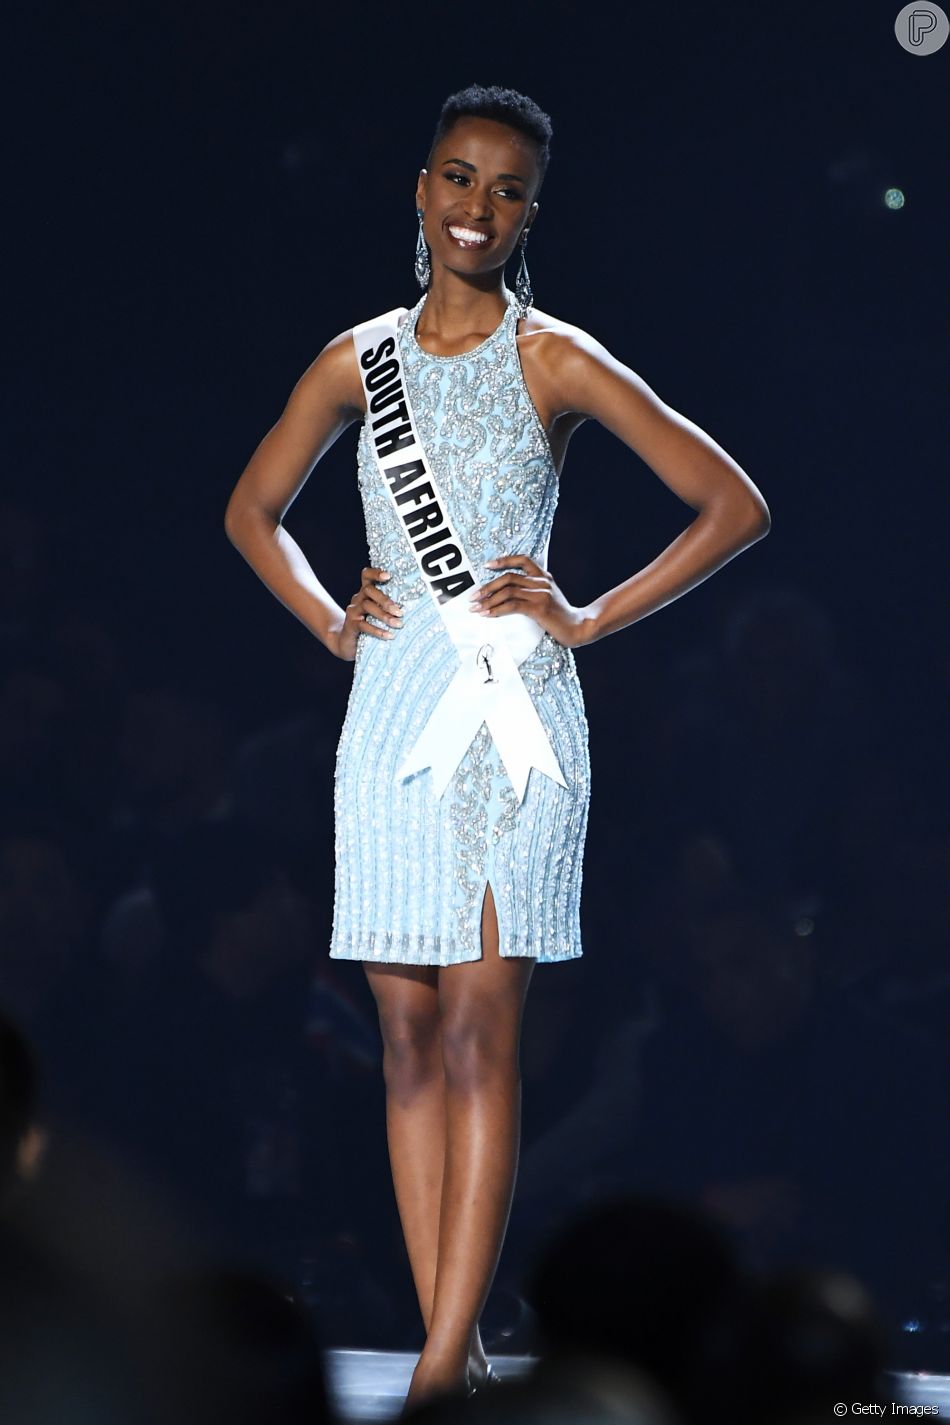 https://static1.purepeople.com.br/articles/3/28/28/23/@/3212239-miss-universo-miss-africa-do-sul-zozibi-950x0-3.jpg